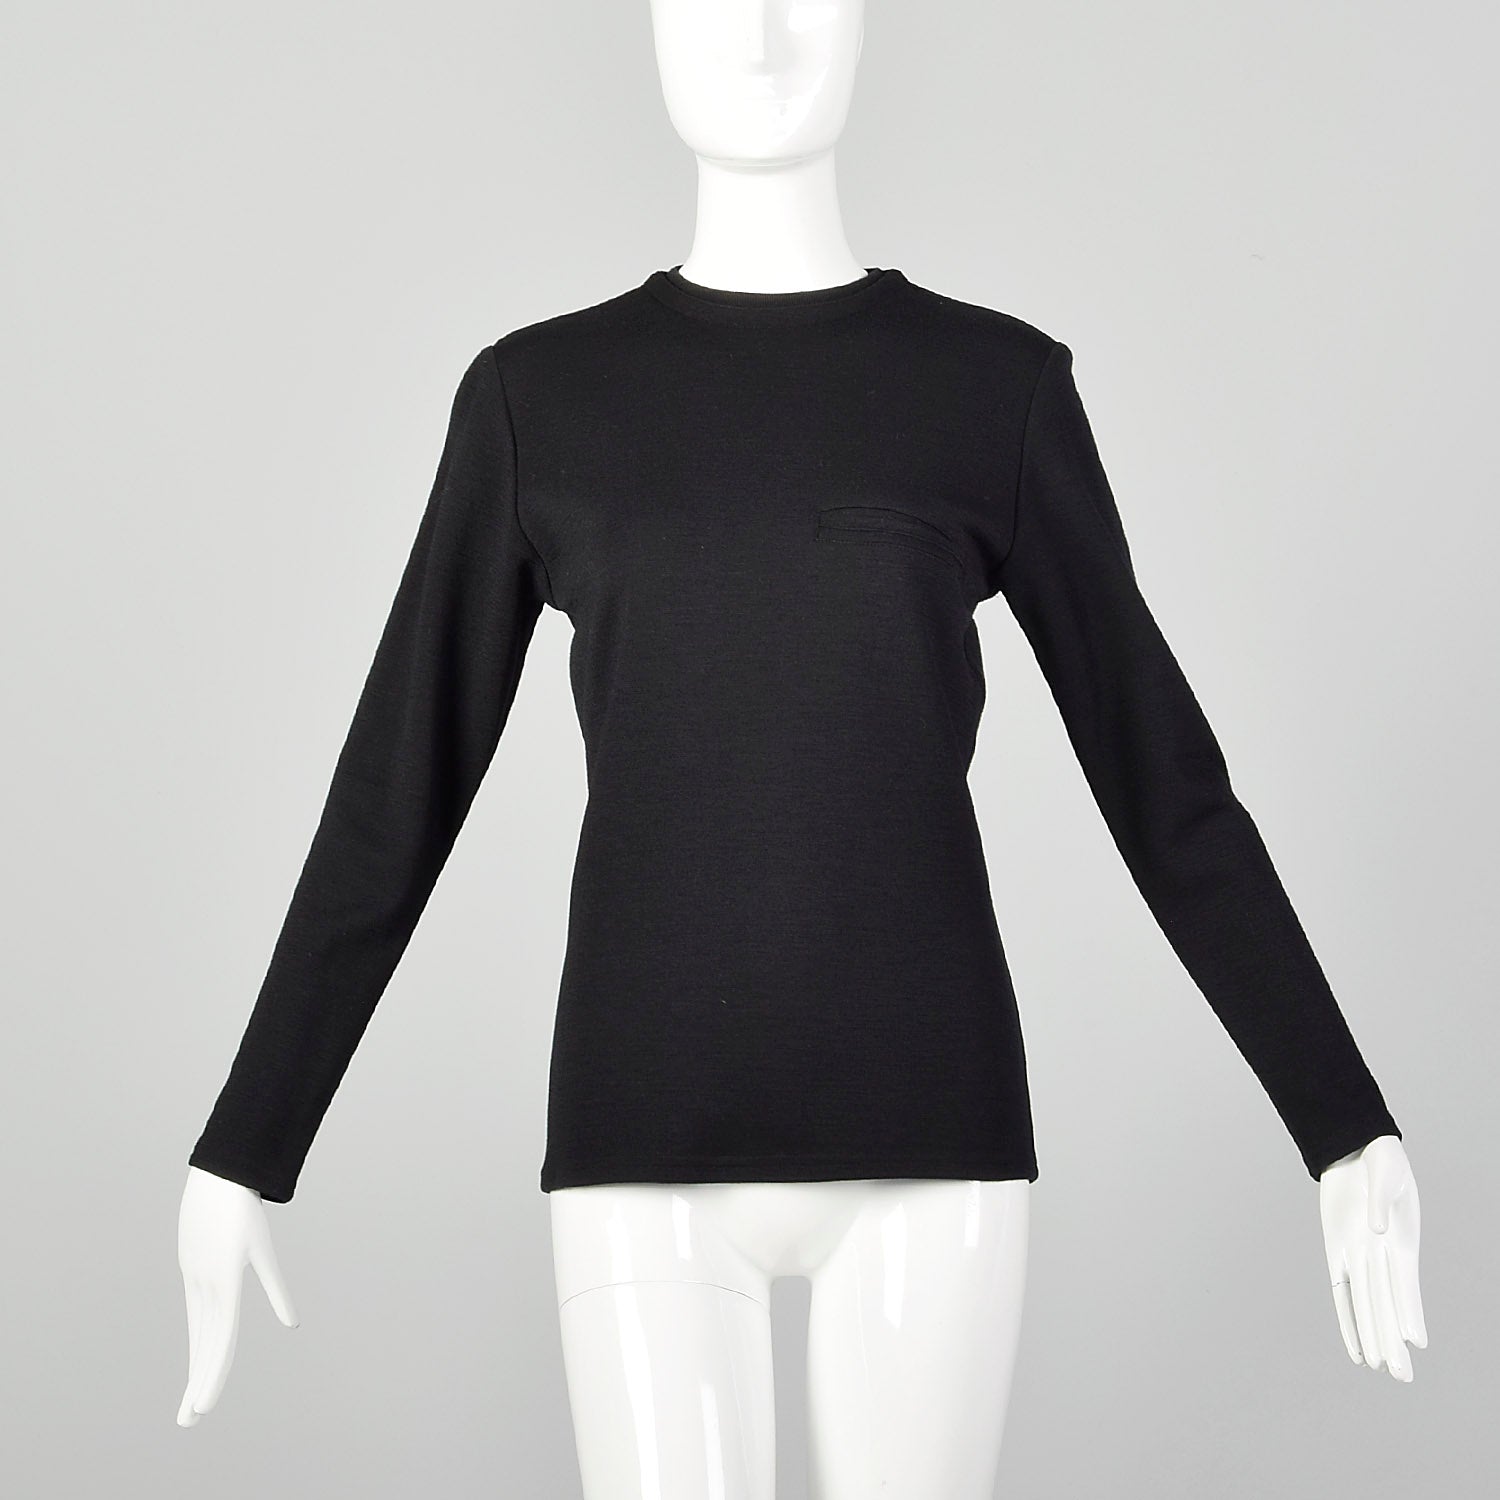 Small 1980s Gianni Versace Black Jersey Knit Top with Long Sleeves